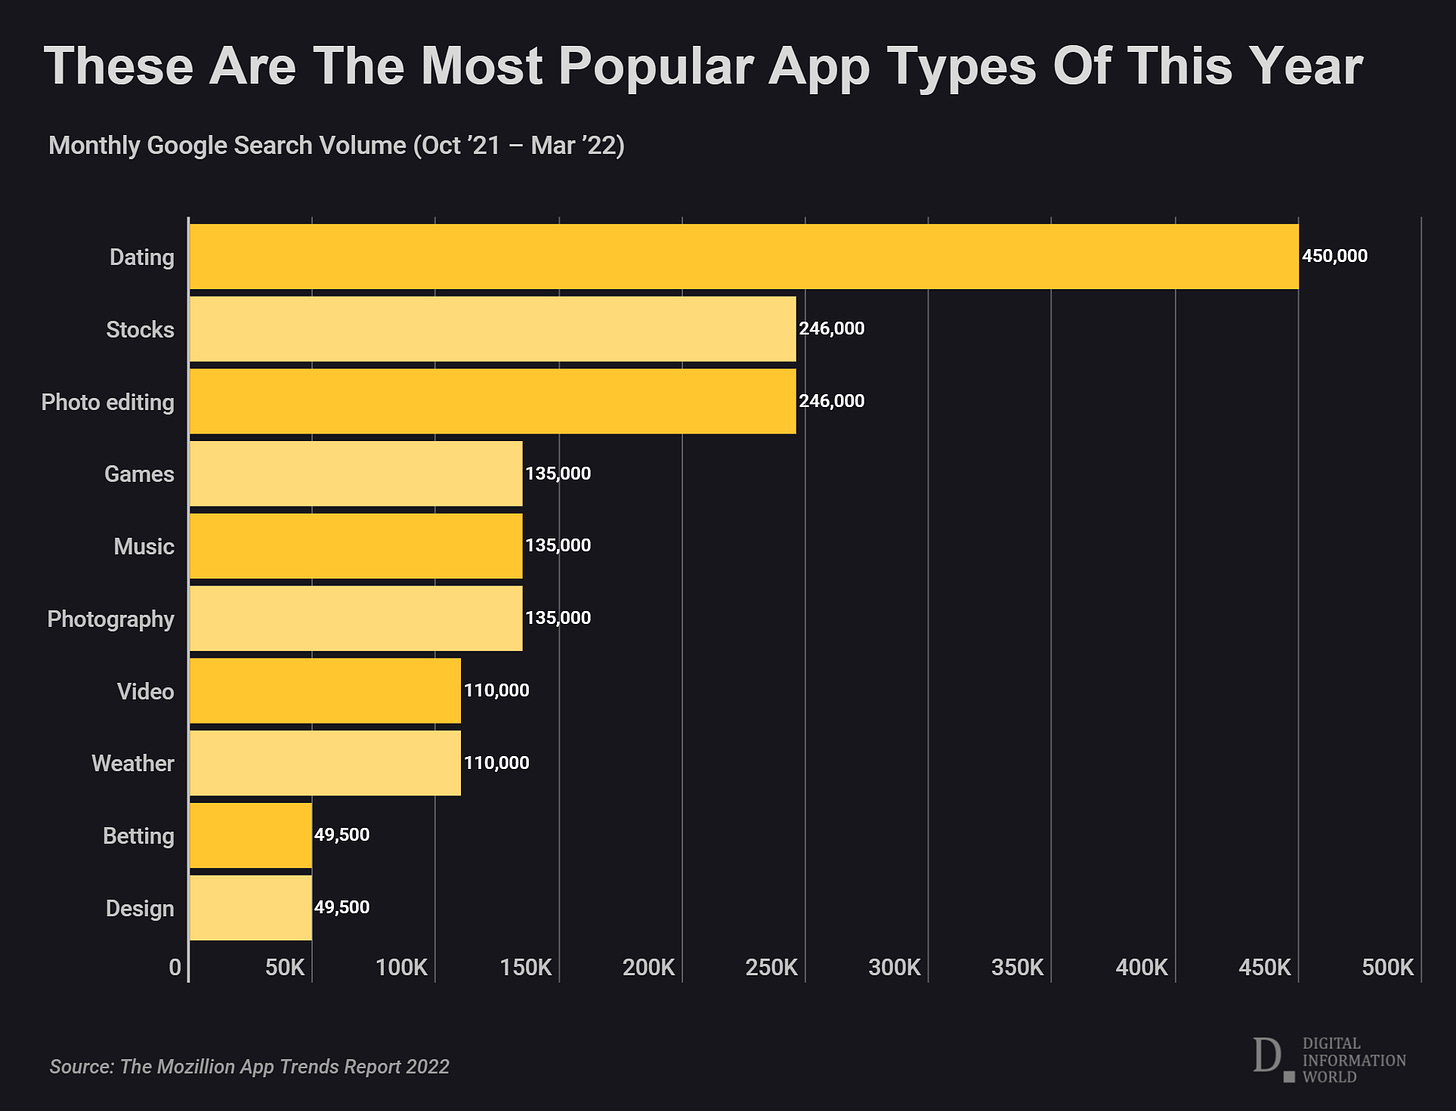 2022 Apps Trend Data Shows Dating, Stocks And Photo Editing Are The 3 Most  Popular App Types / Digital Information World